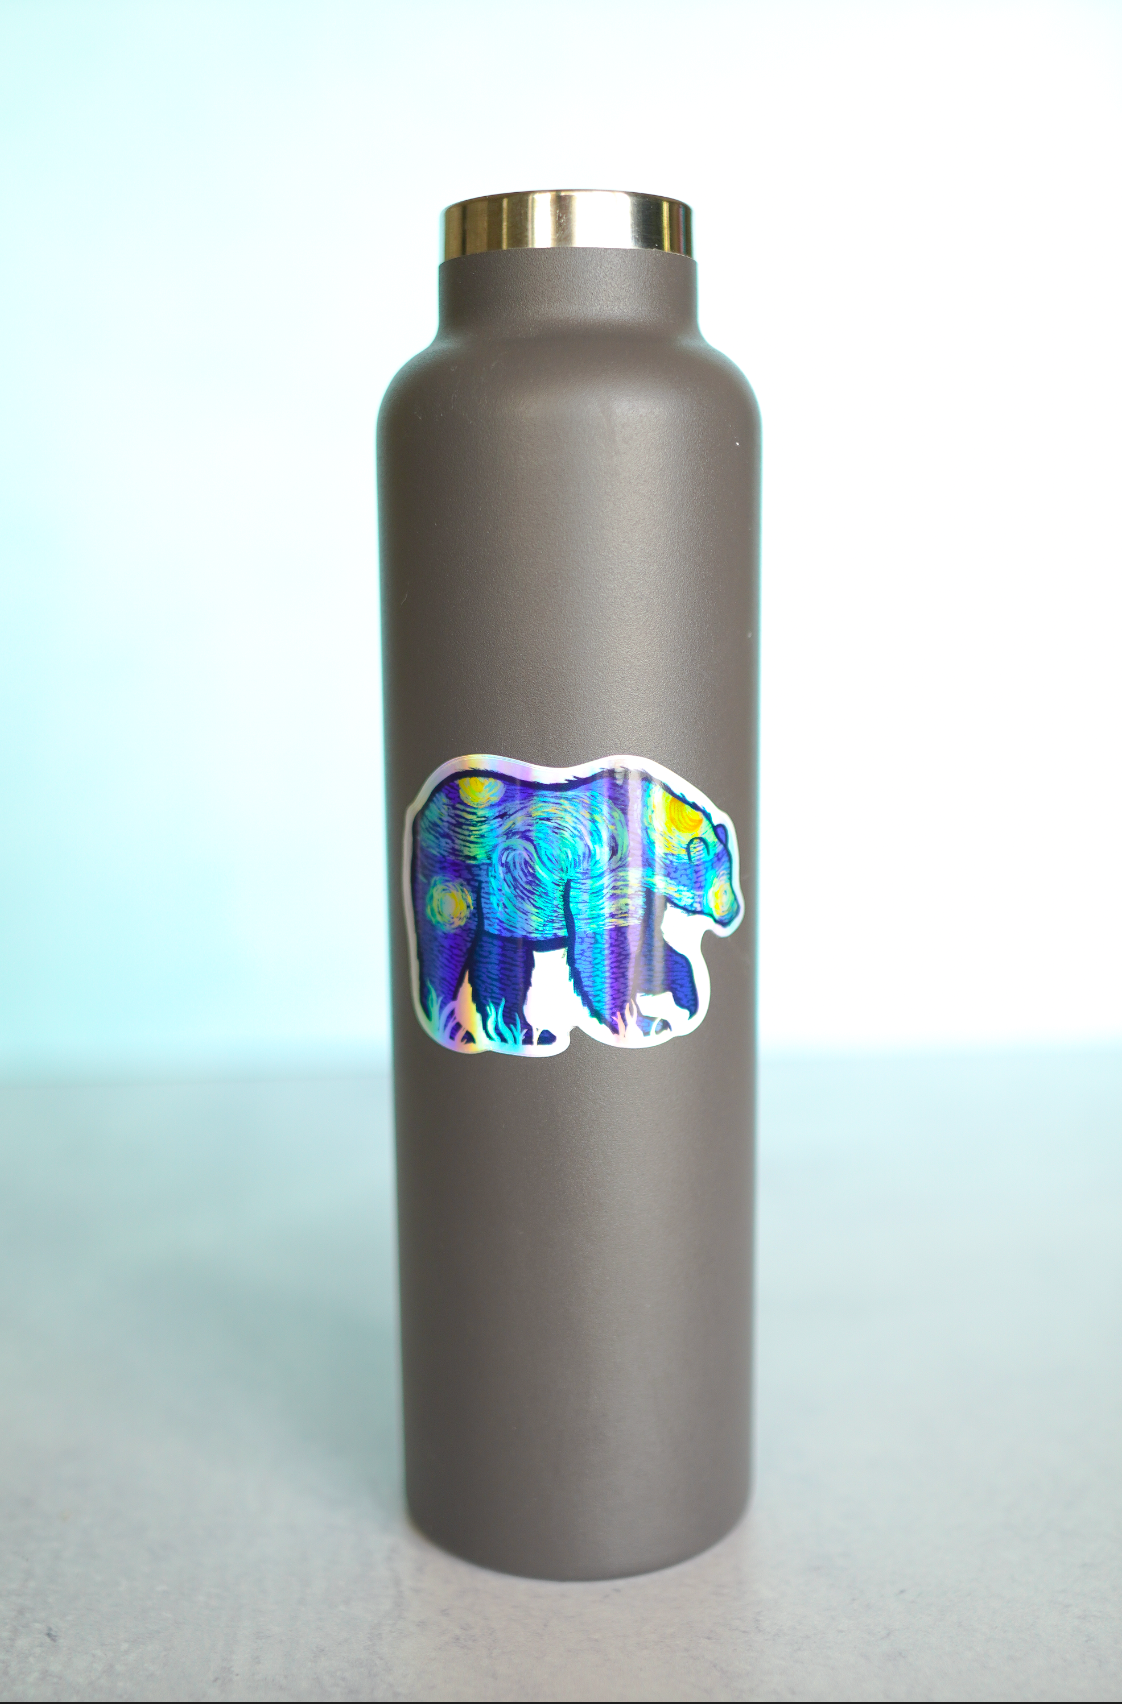 Starry Bear Holographic Sticker